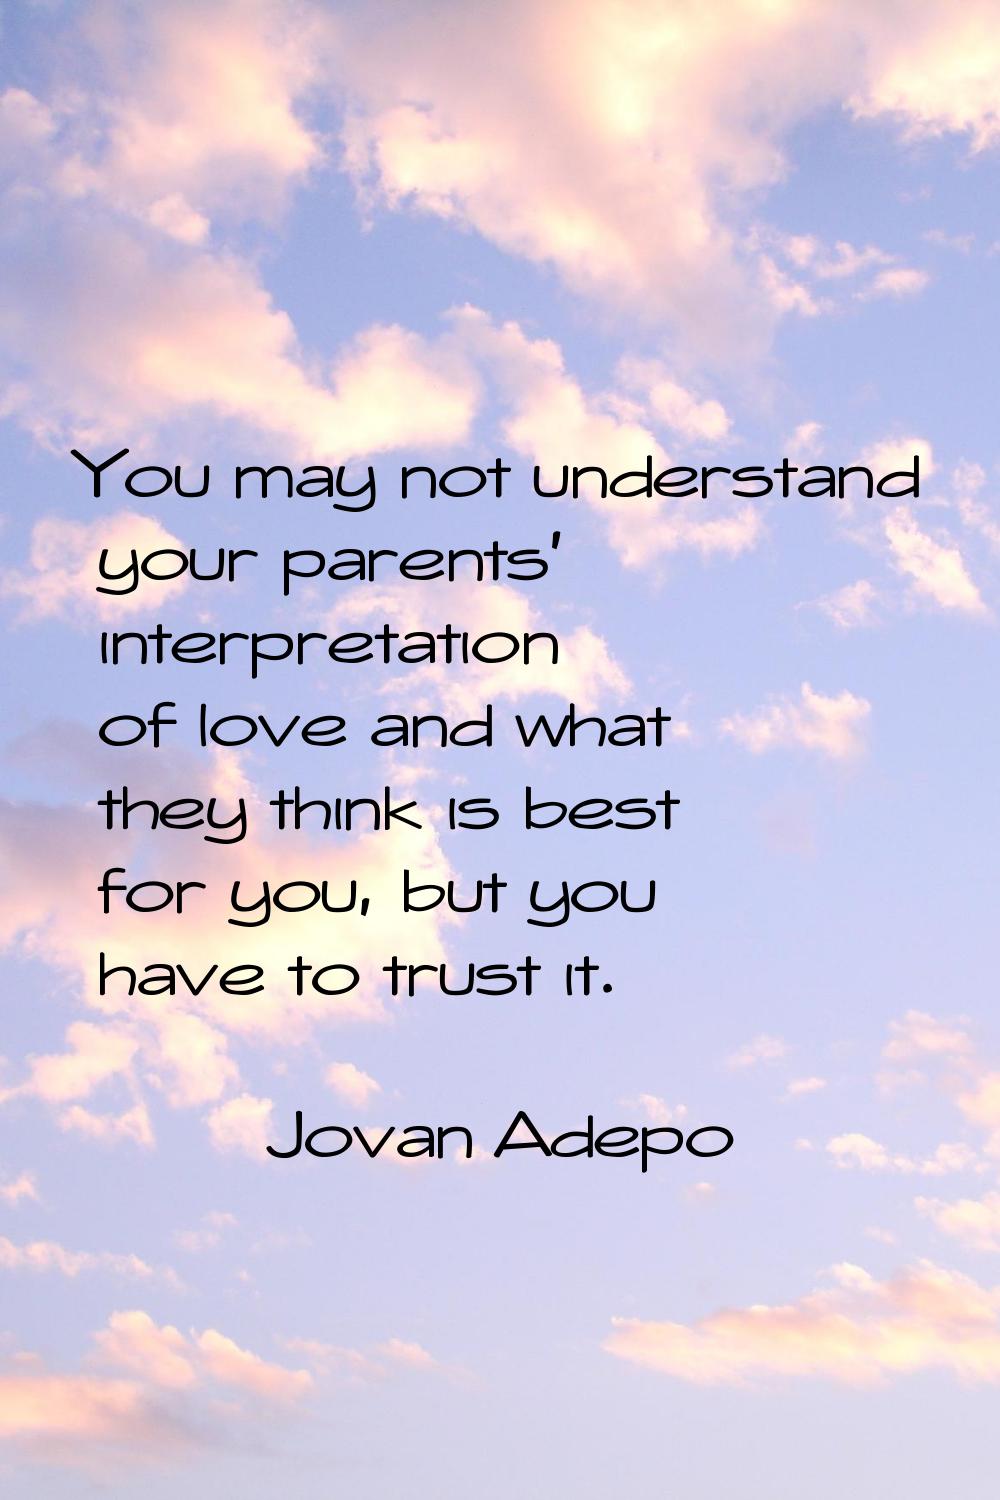 You may not understand your parents' interpretation of love and what they think is best for you, bu